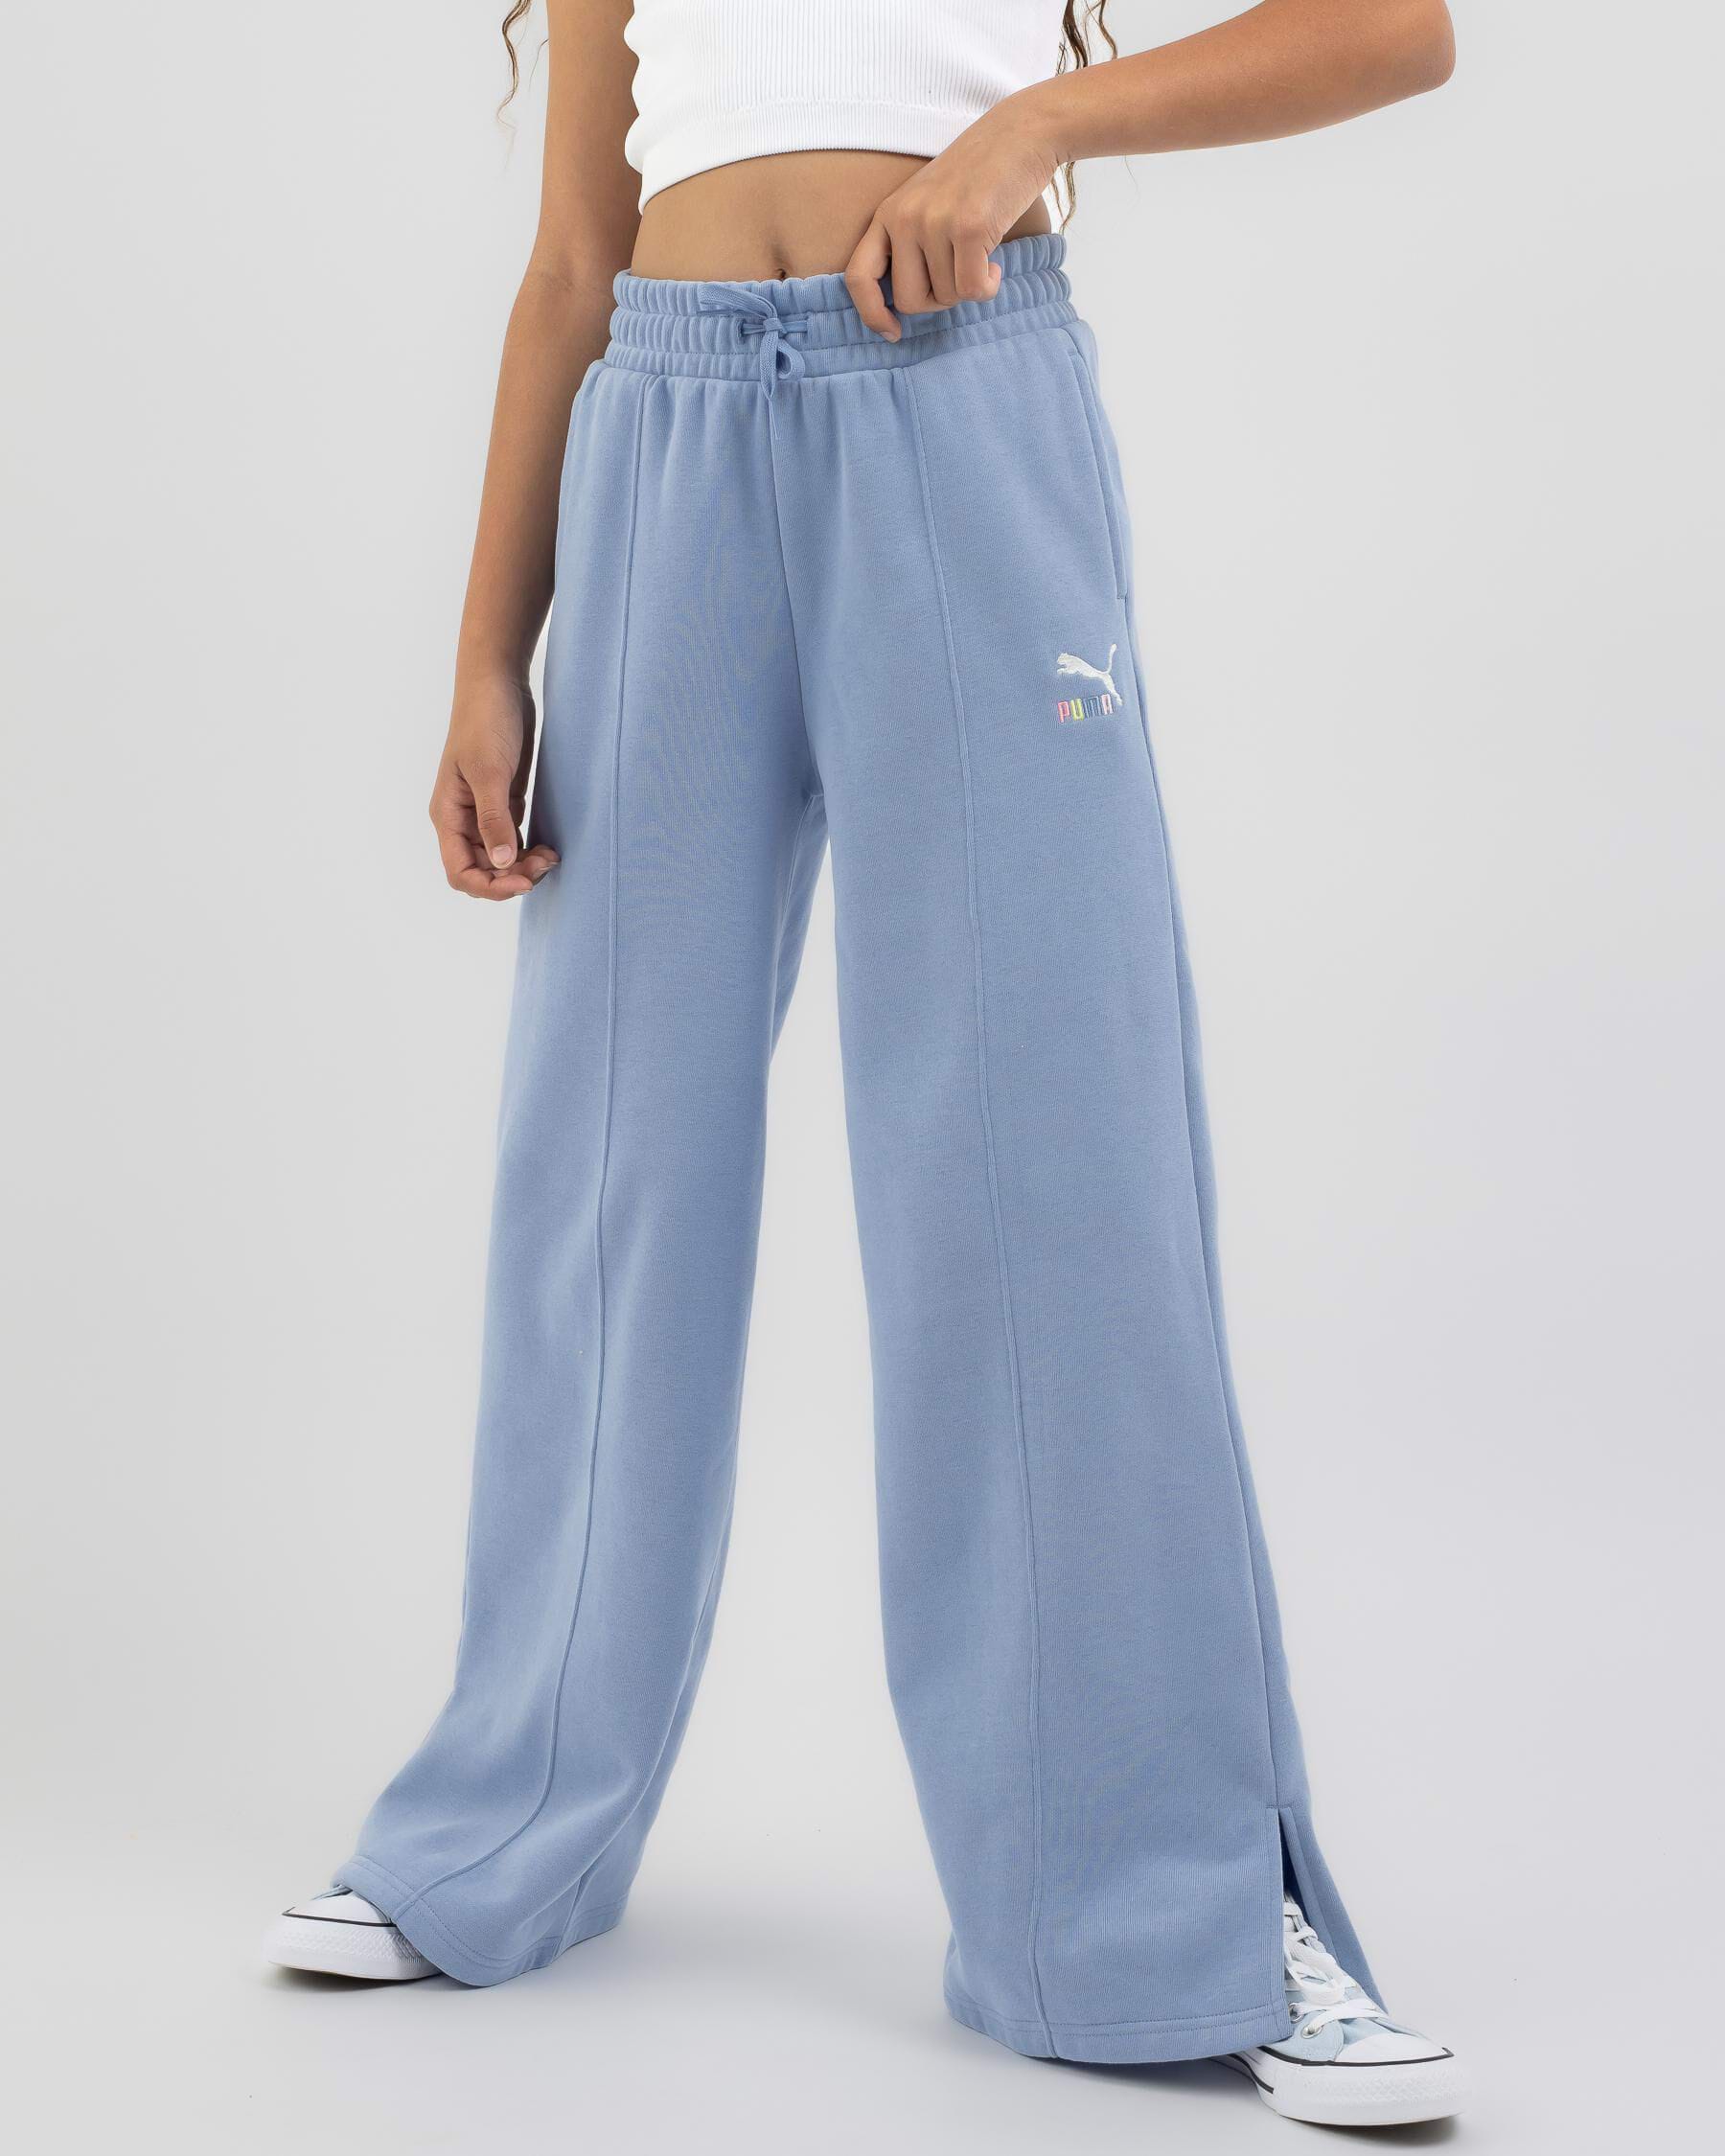 Buy Rosatro Womens Track Pants Casual Bohemian Loose Yoga Lounge Beach  Print Pants Loose Fit Tracksuit Bottoms(Light Blue,Free Size) at Amazon.in